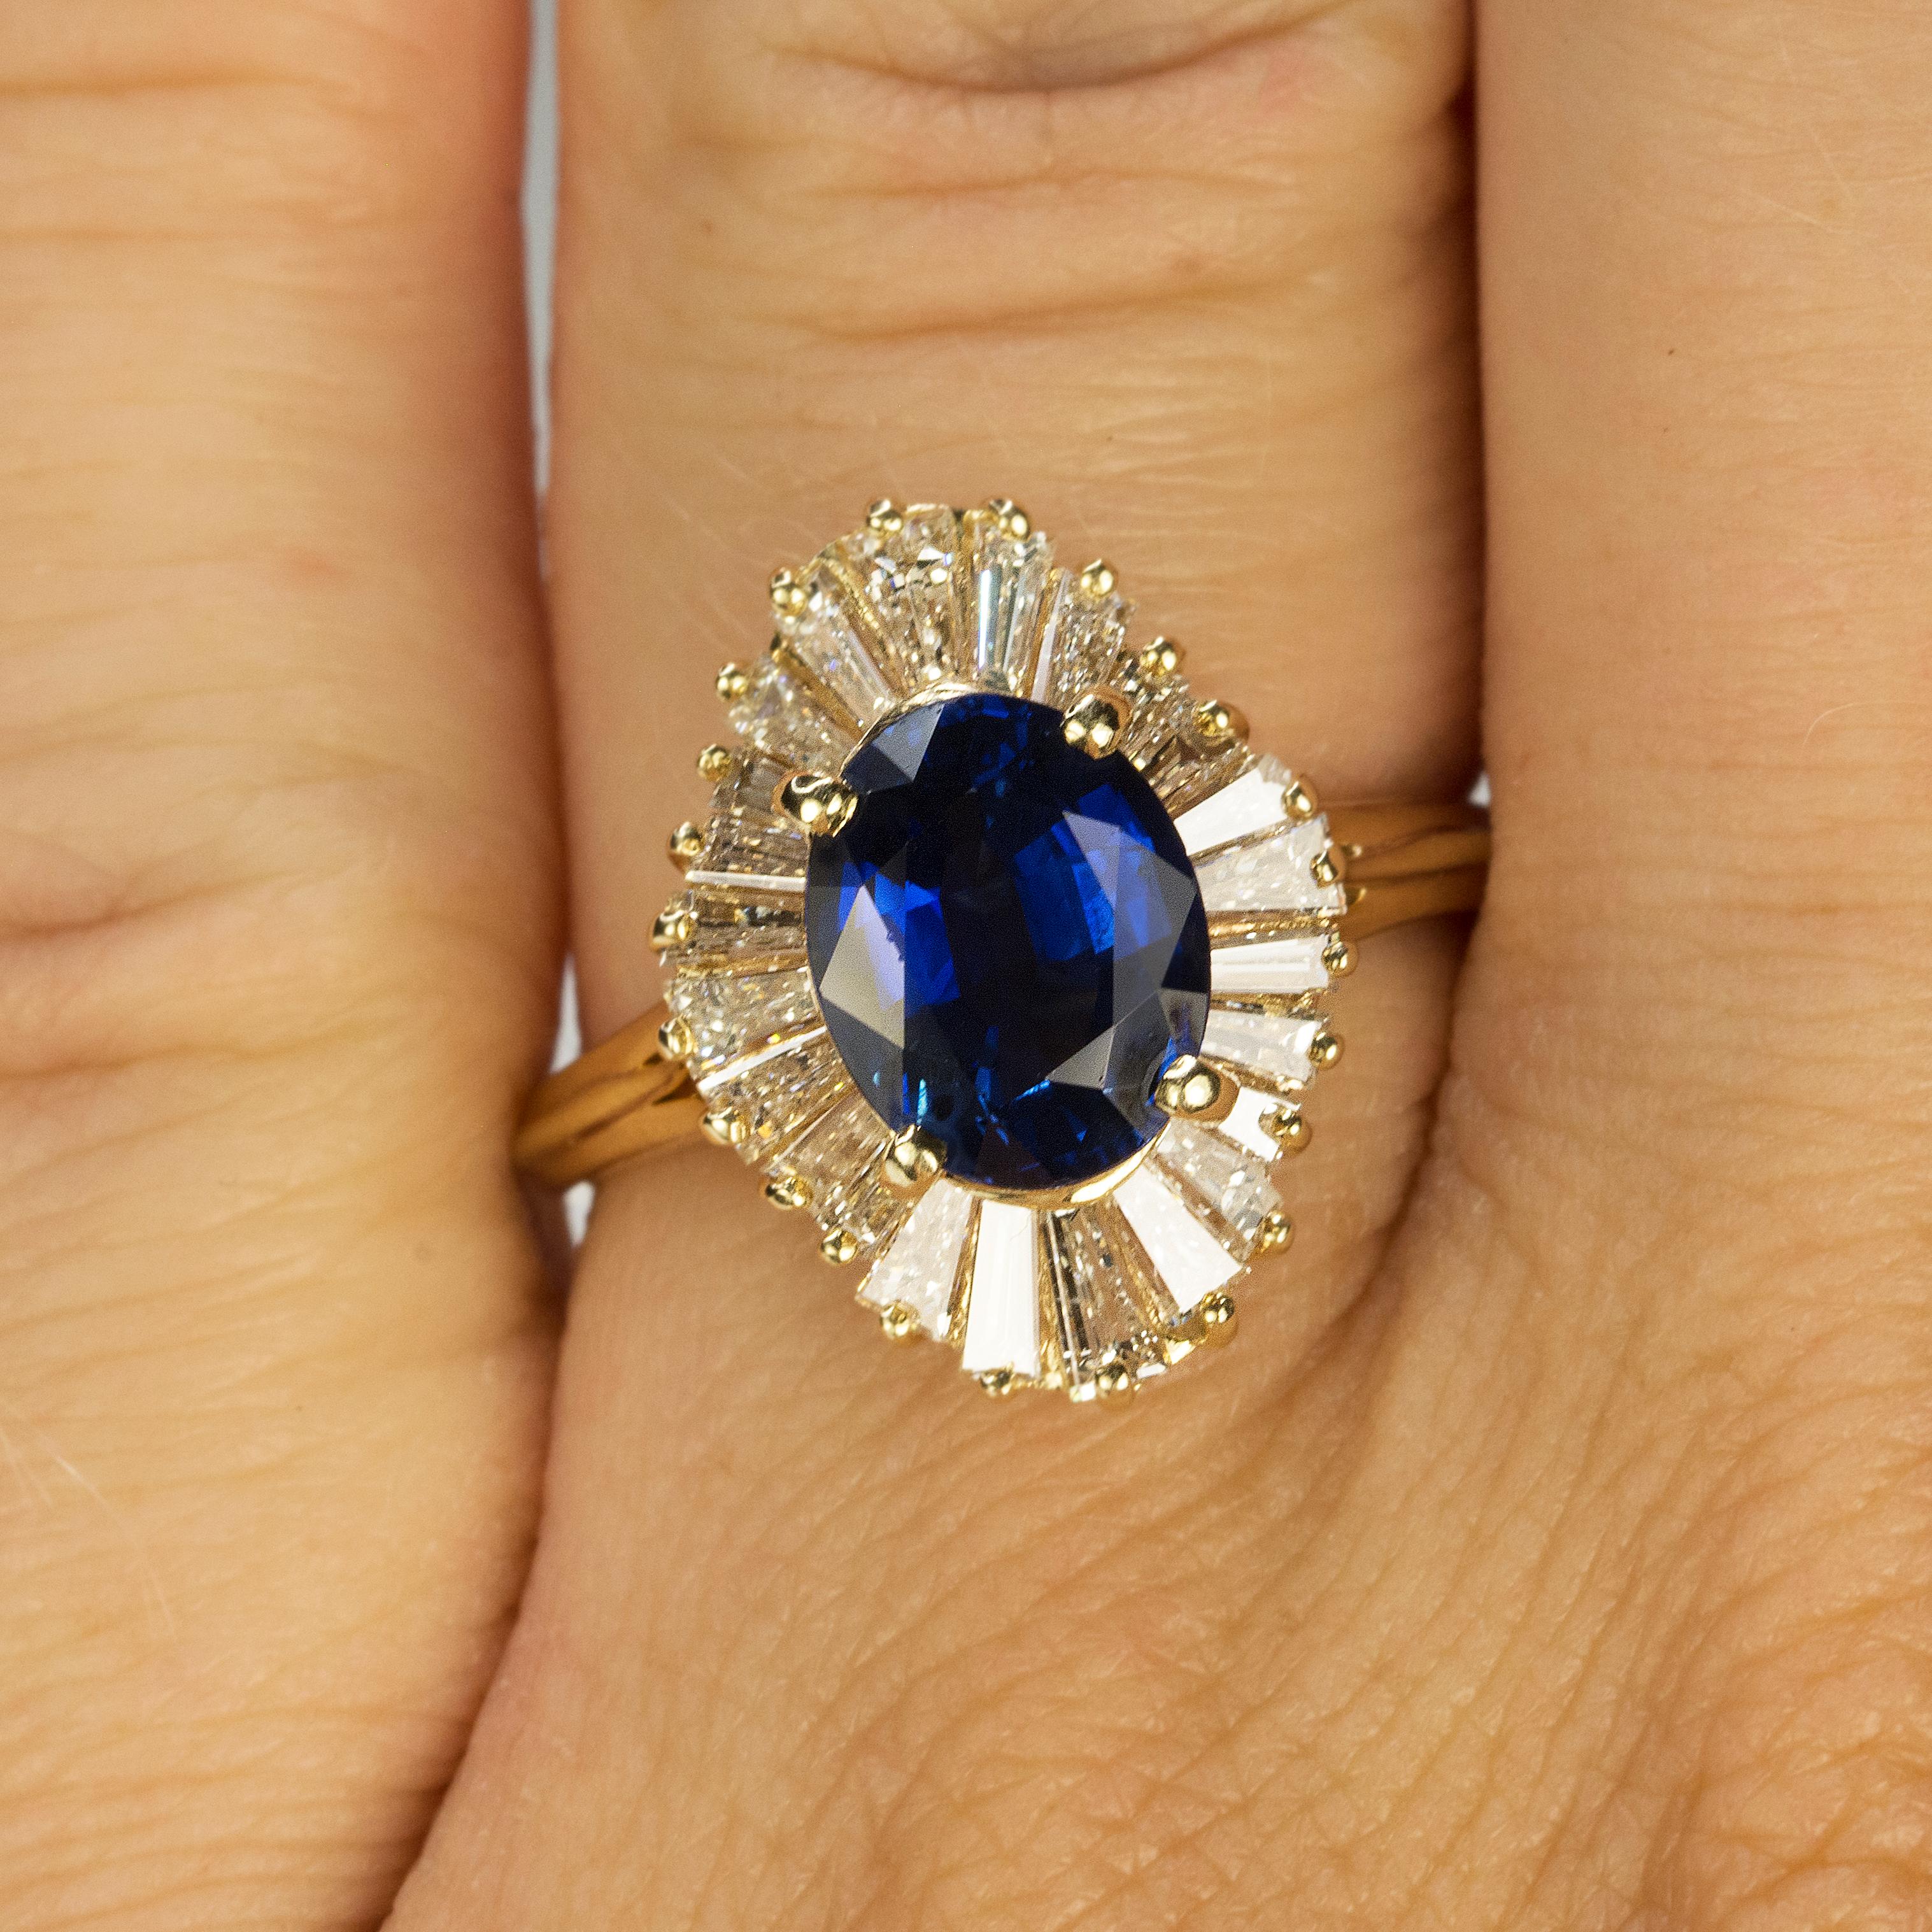 Women's or Men's Gold Ballerina Ring with Royal Blue Sapphire